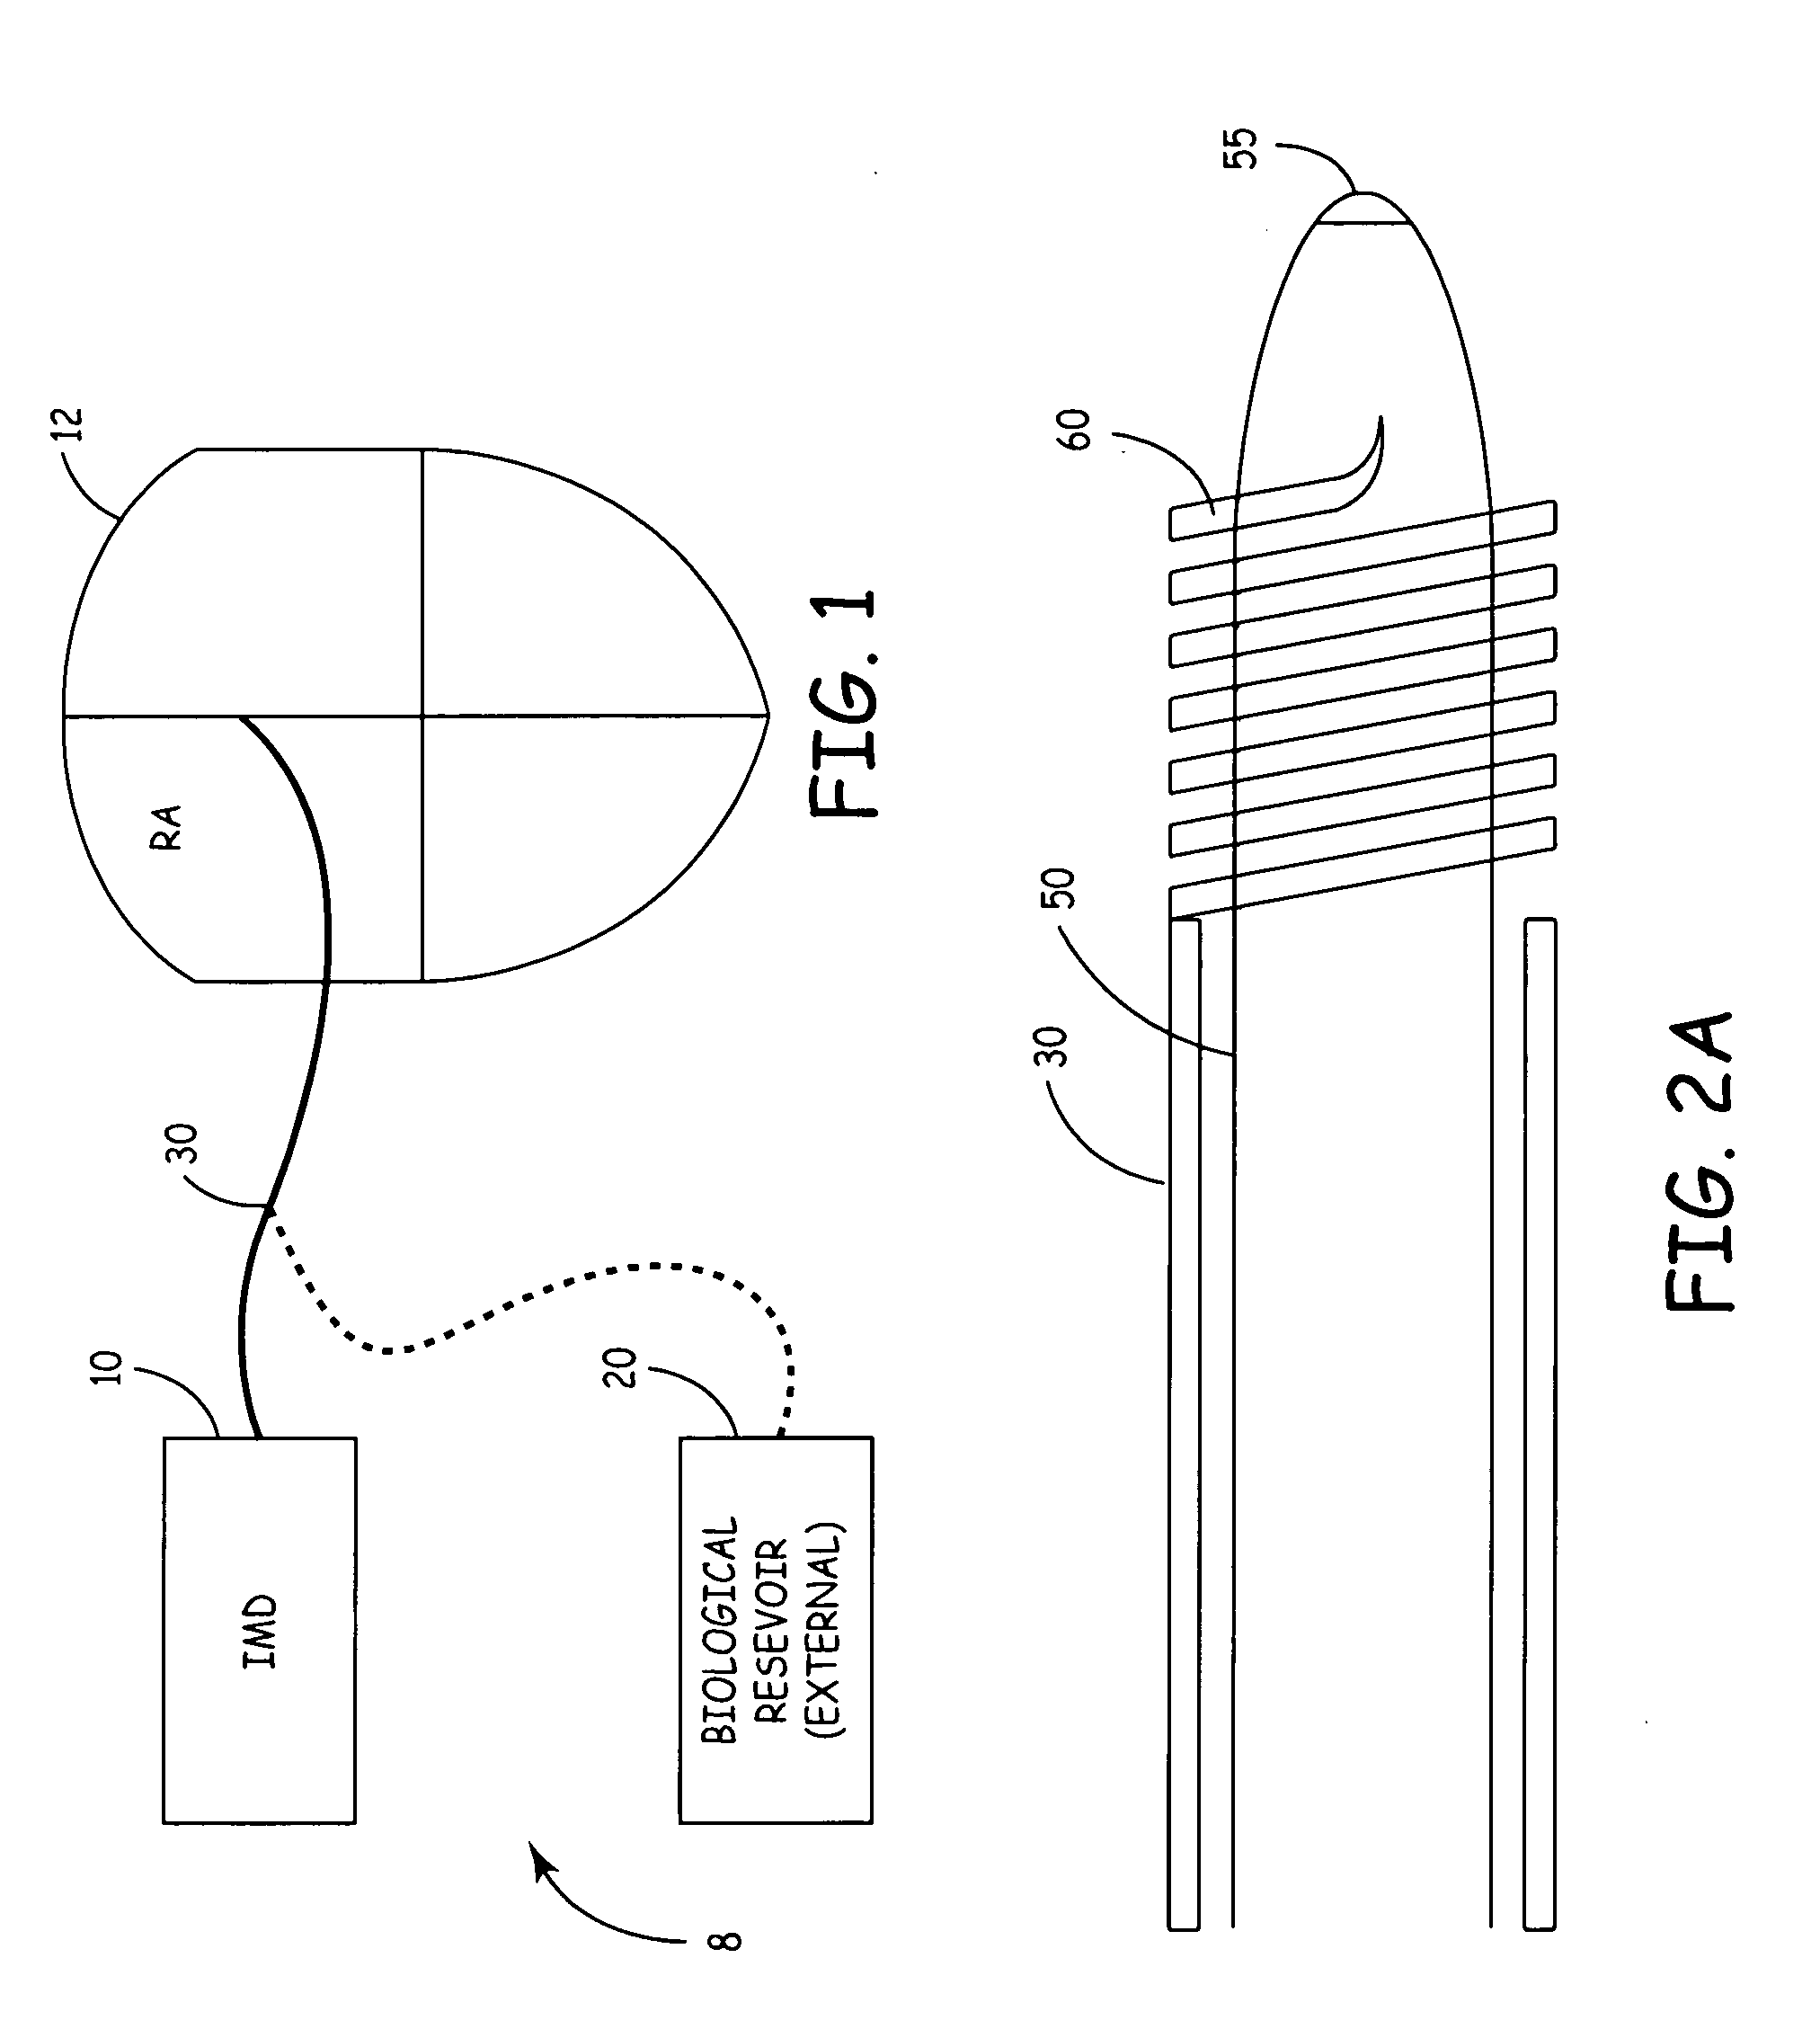 System for the delivery of a biologic therapy with device monitoring and back-up